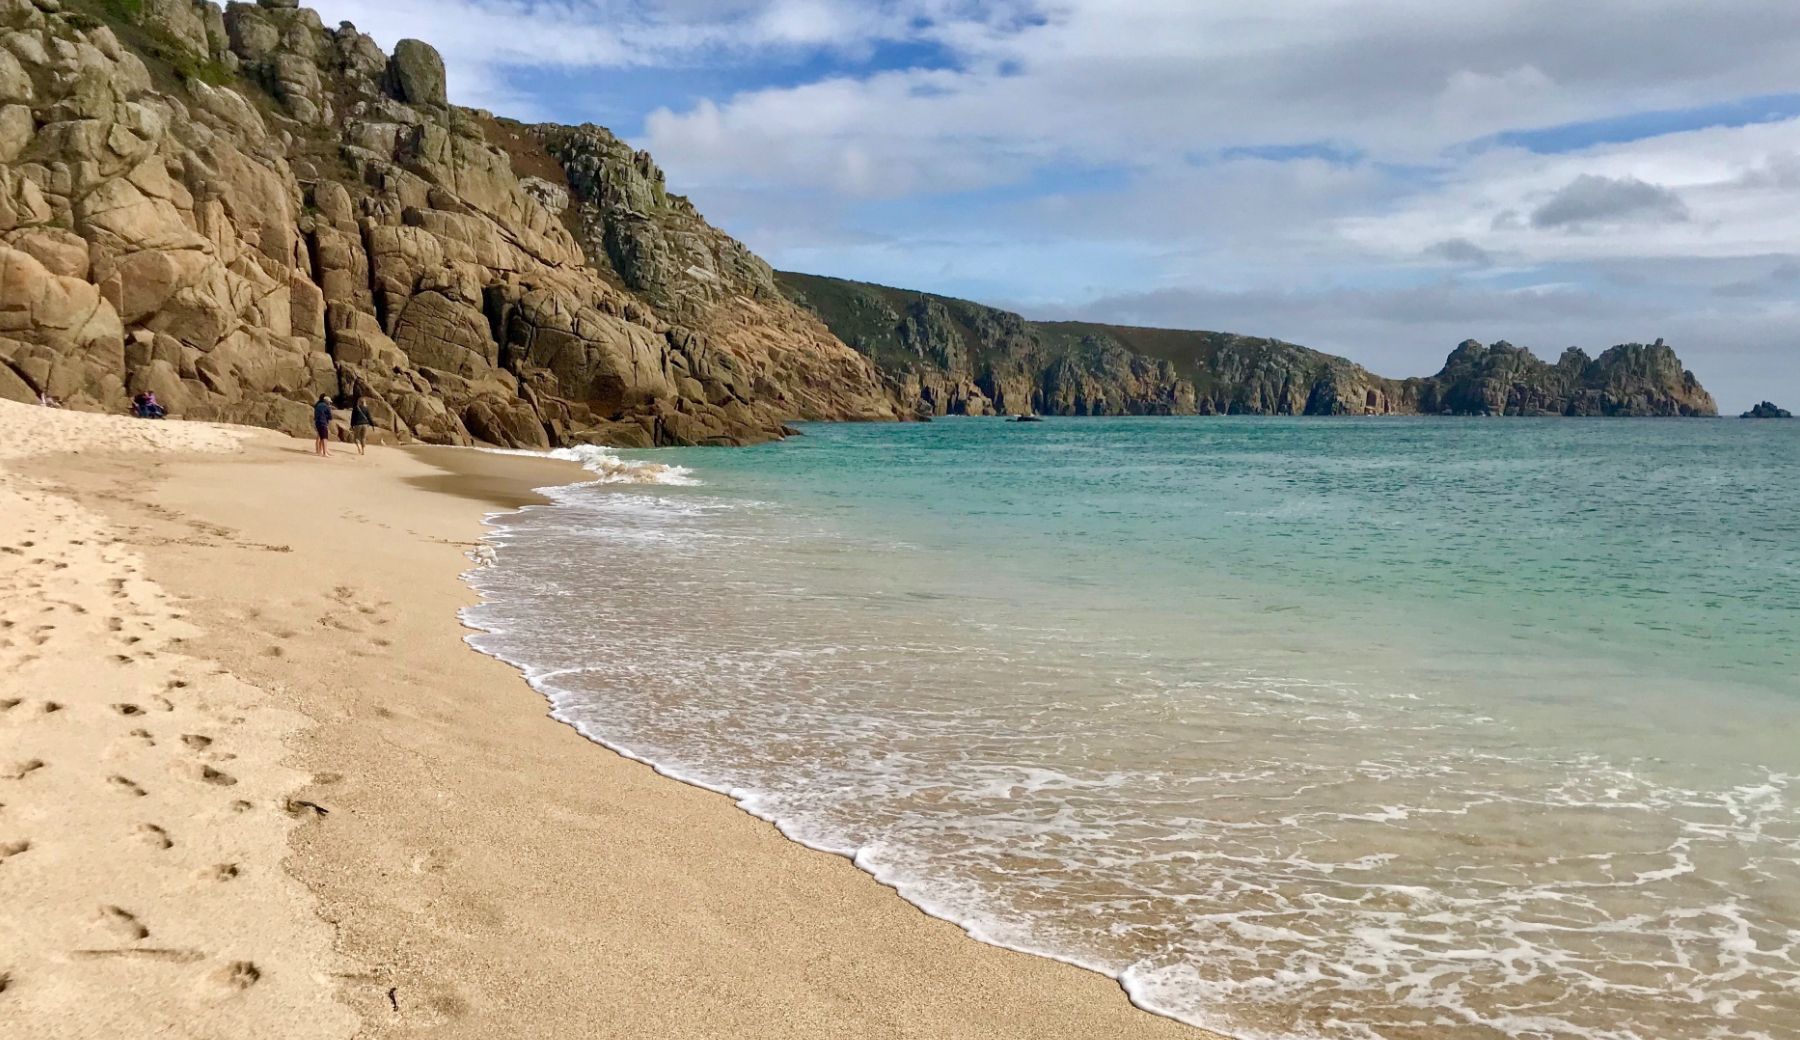 Image of Porthcurno beach - one of the beaches listed on Find Me a Beach